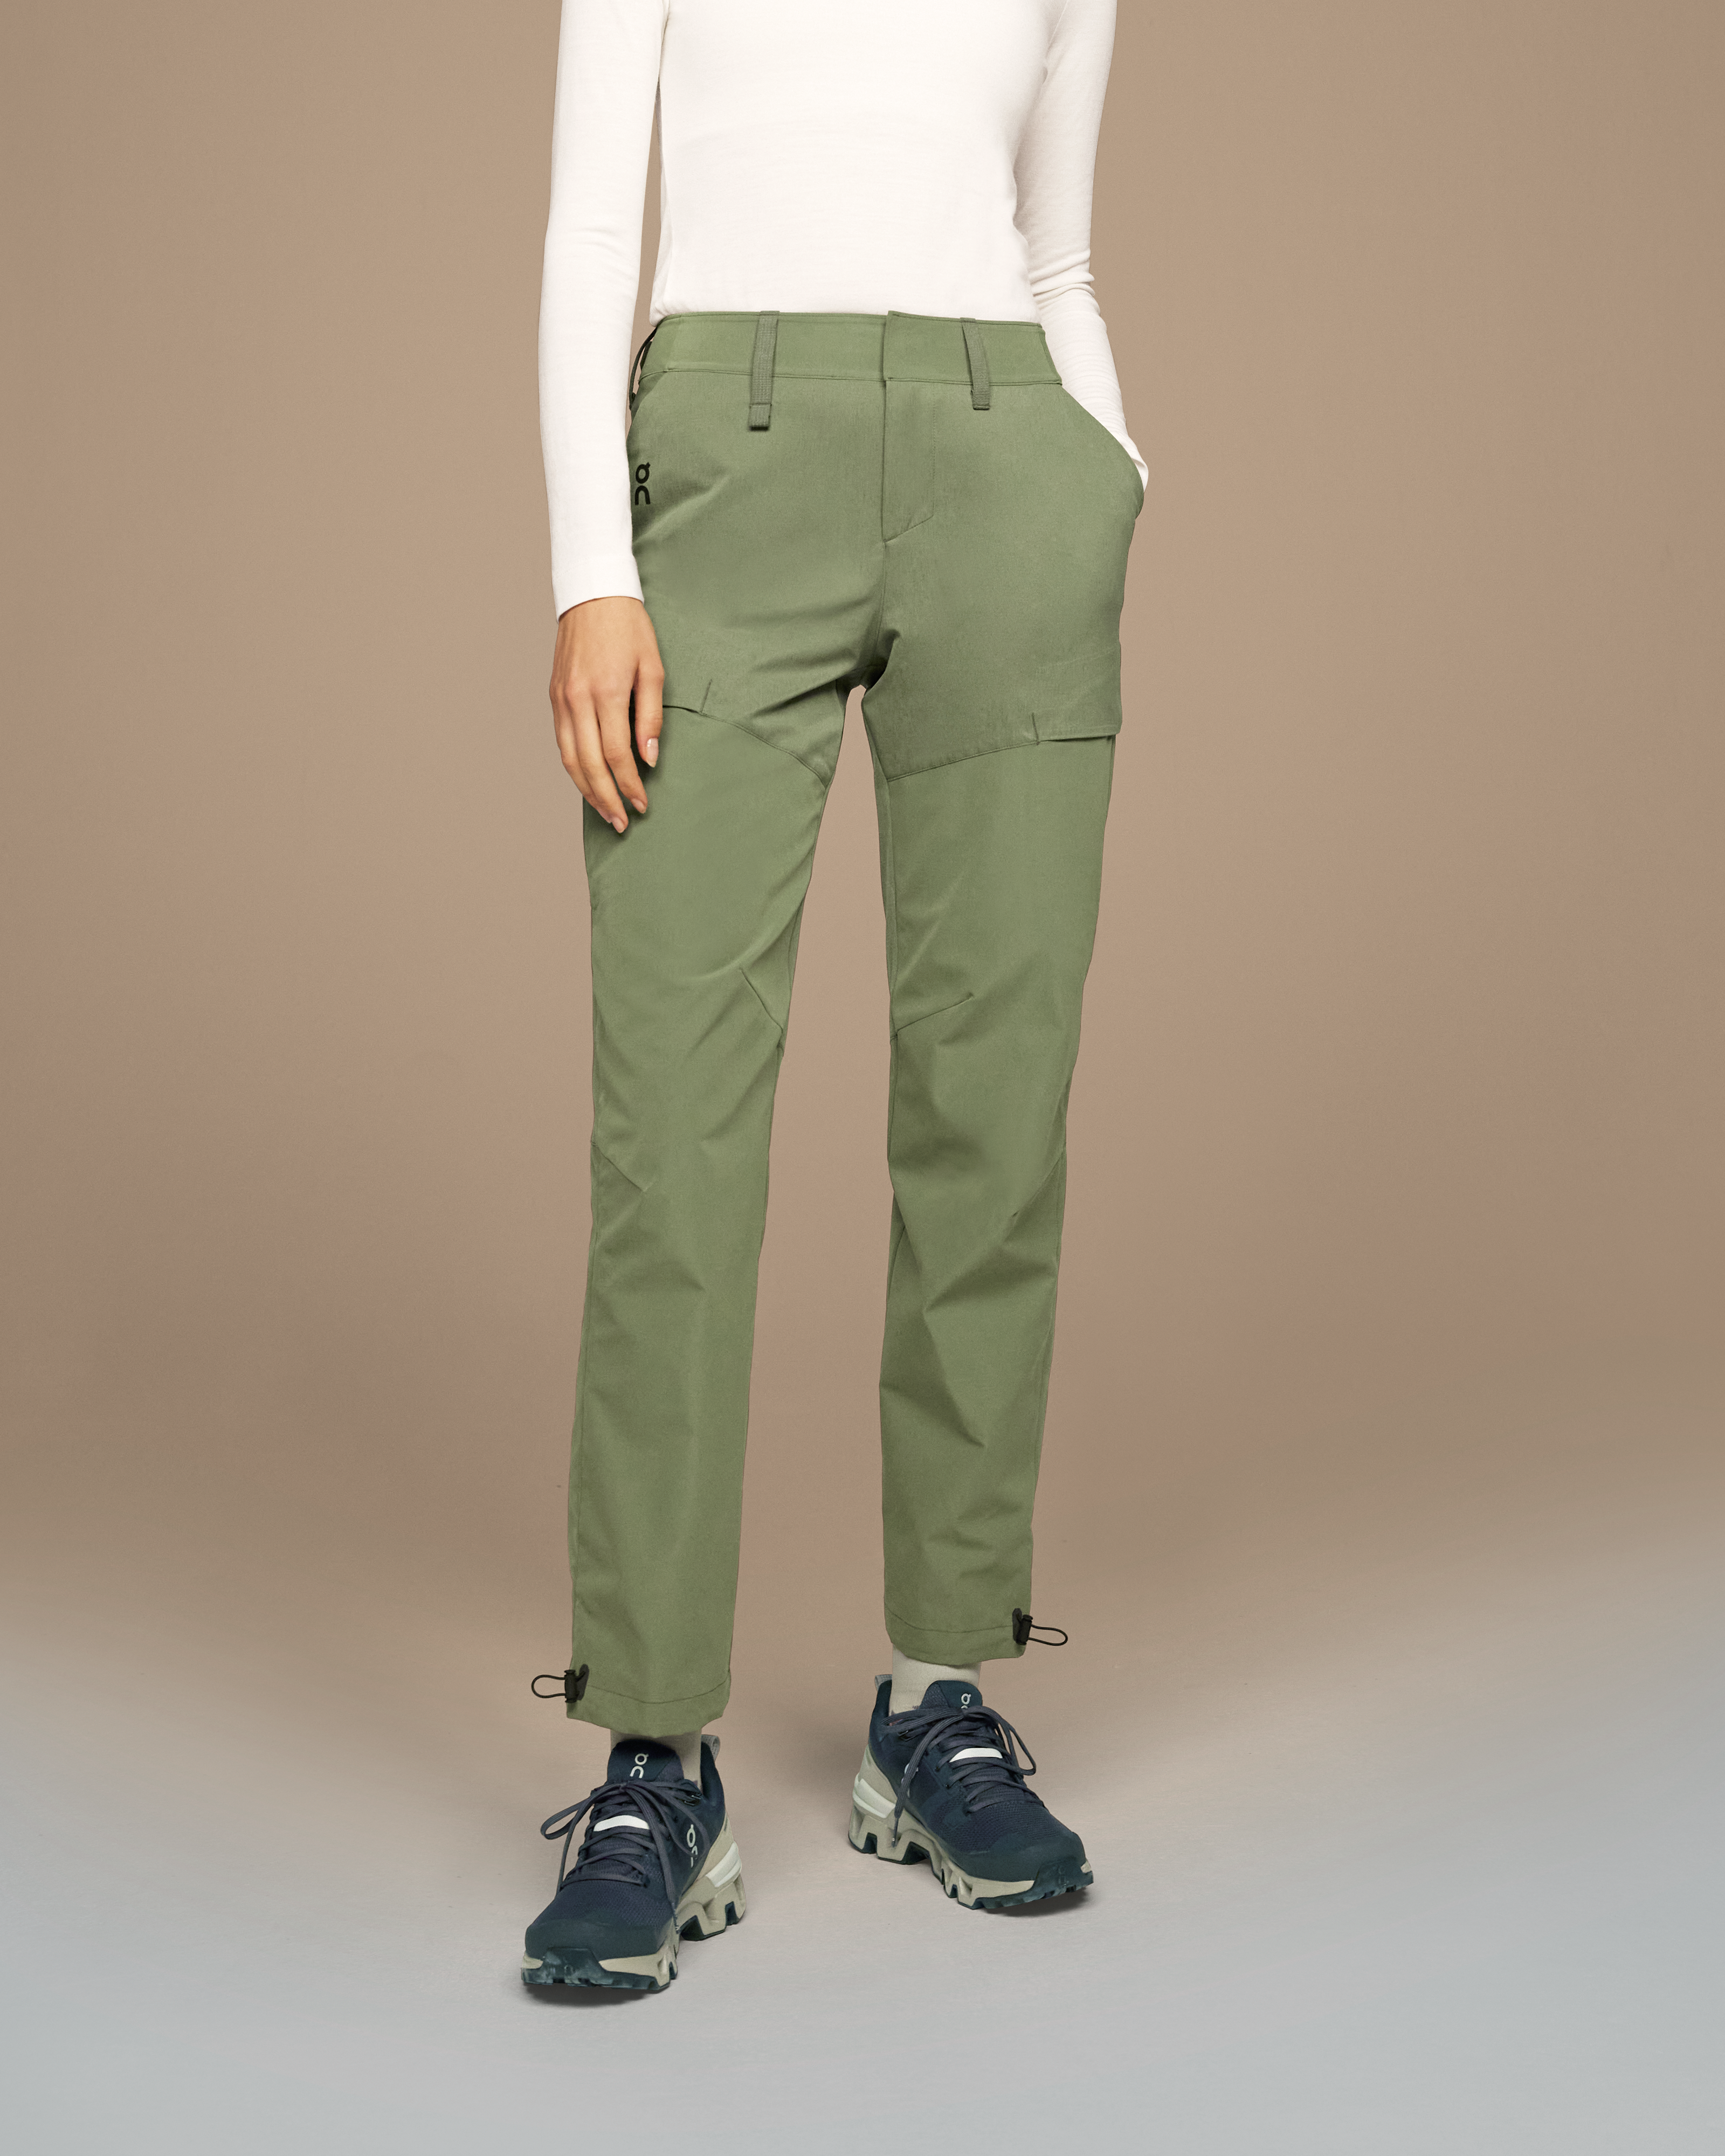 Women's Hiking Pants, Free Delivery